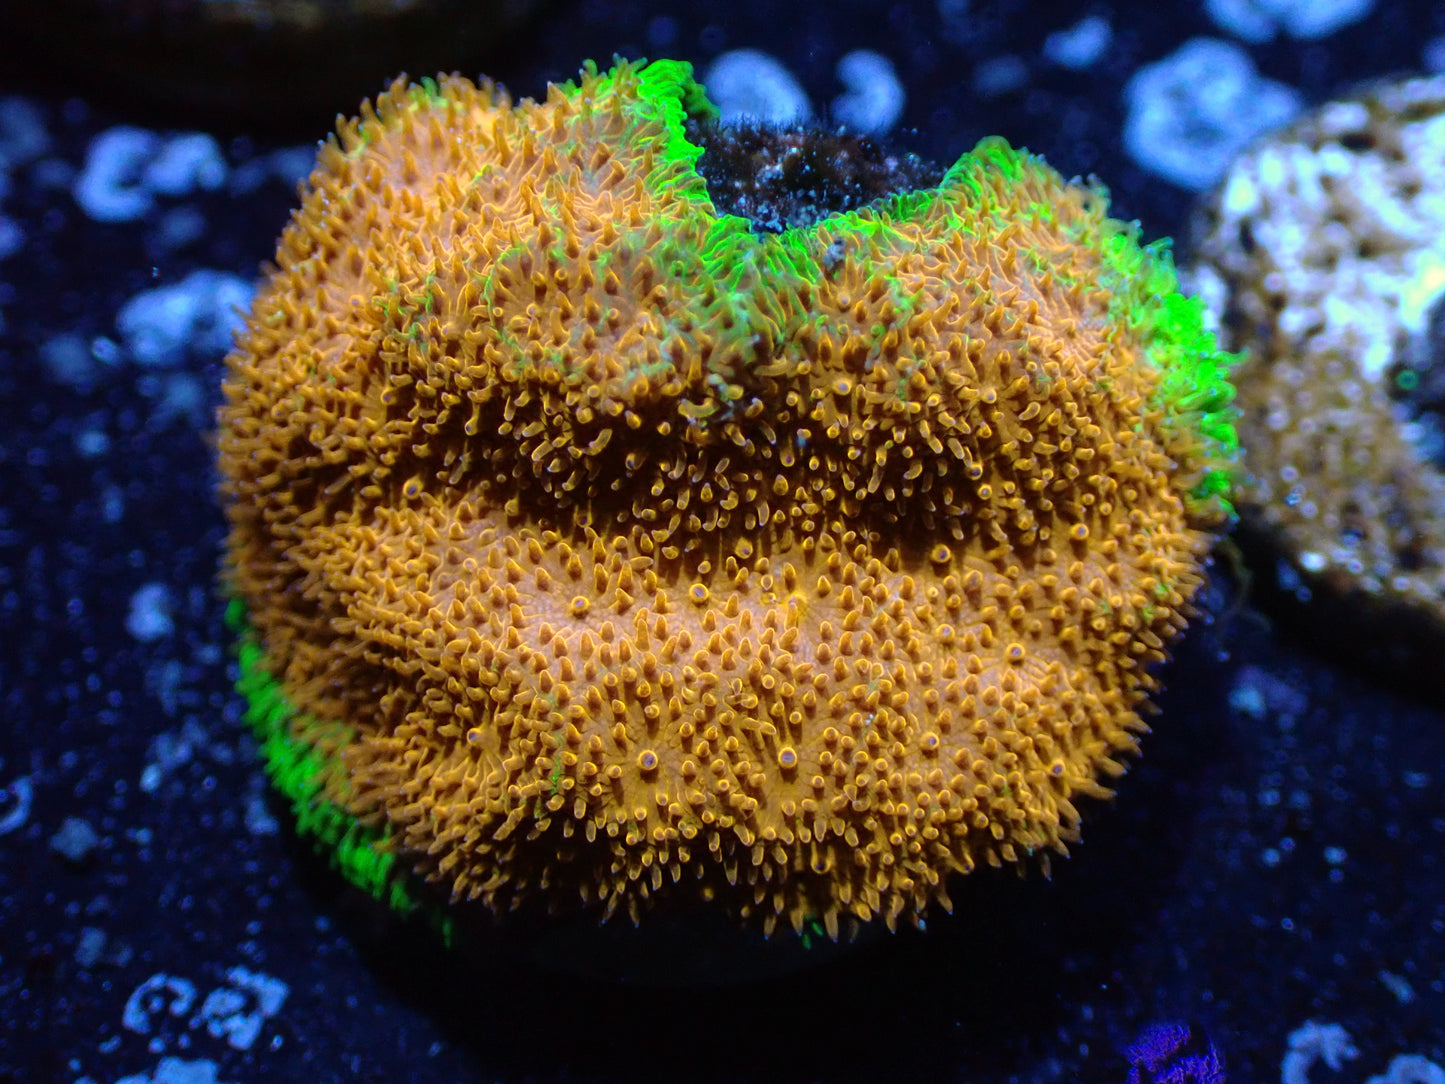 Aquacultured Fungia Auction 8/2 ended